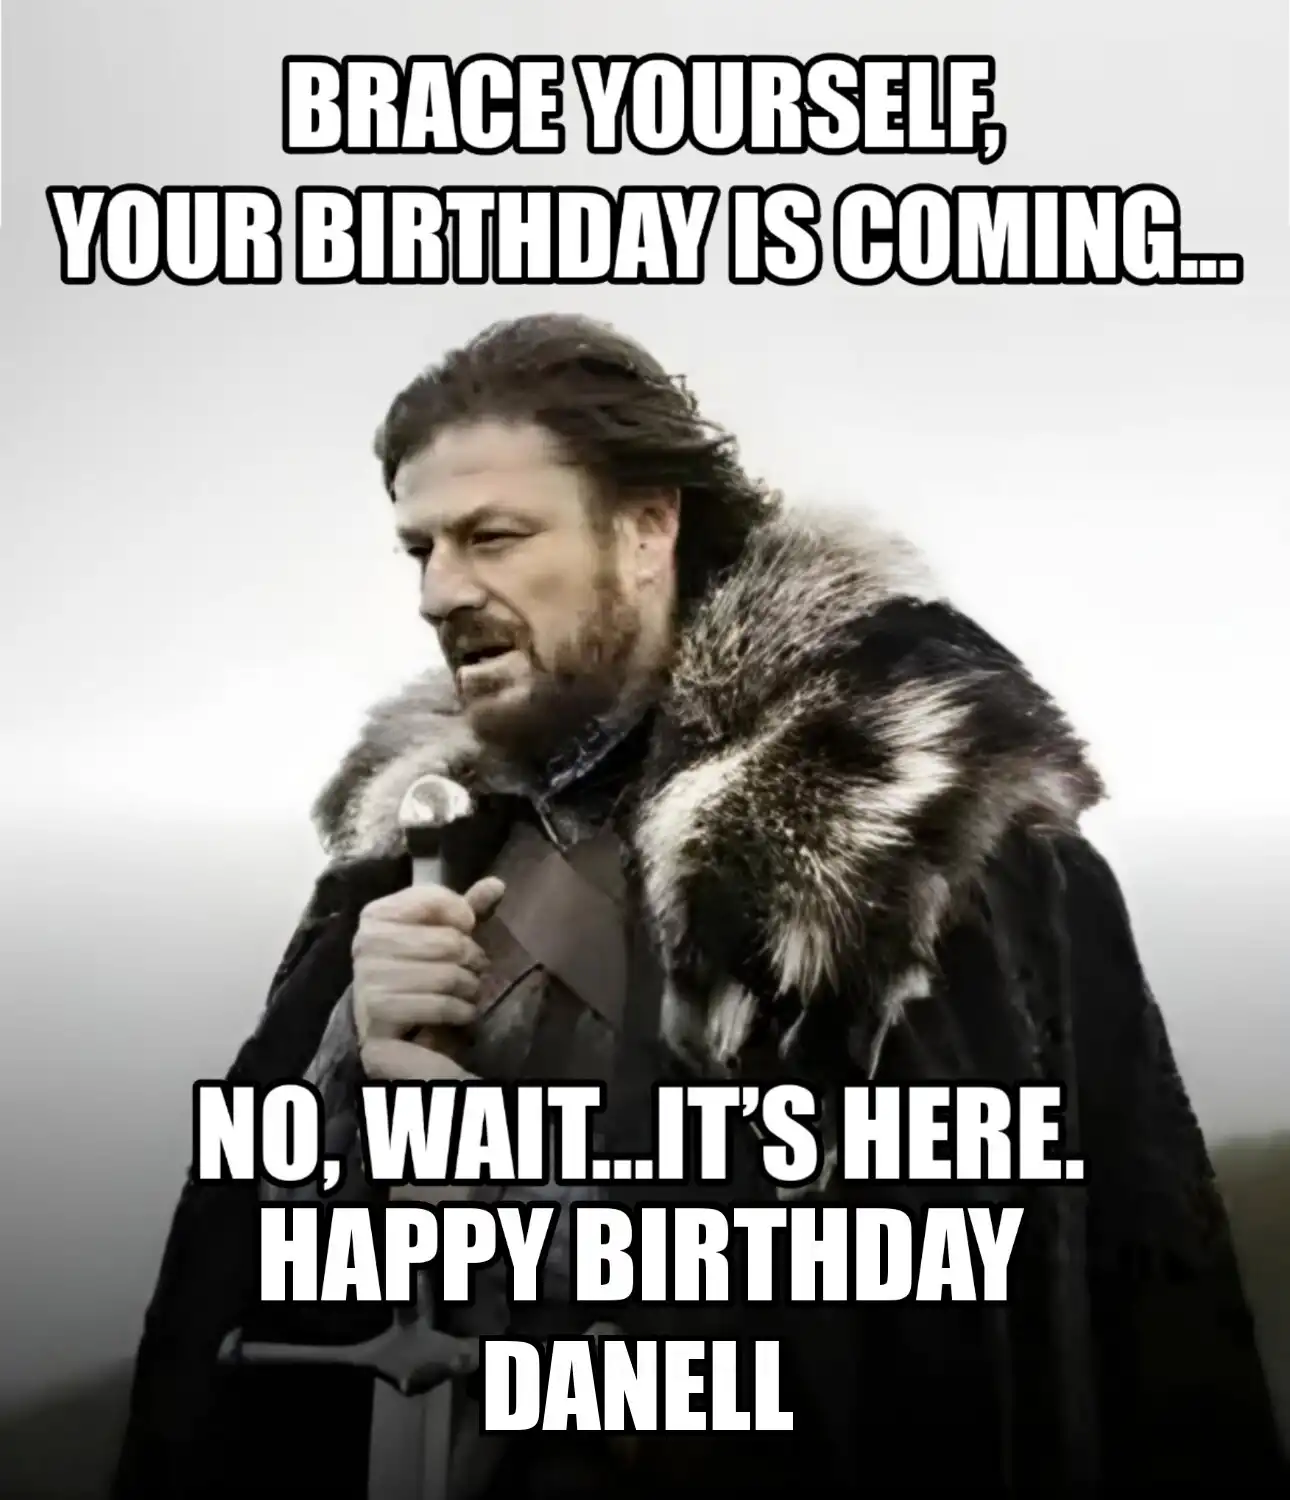 Happy Birthday Danell Brace Yourself Your Birthday Is Coming Meme